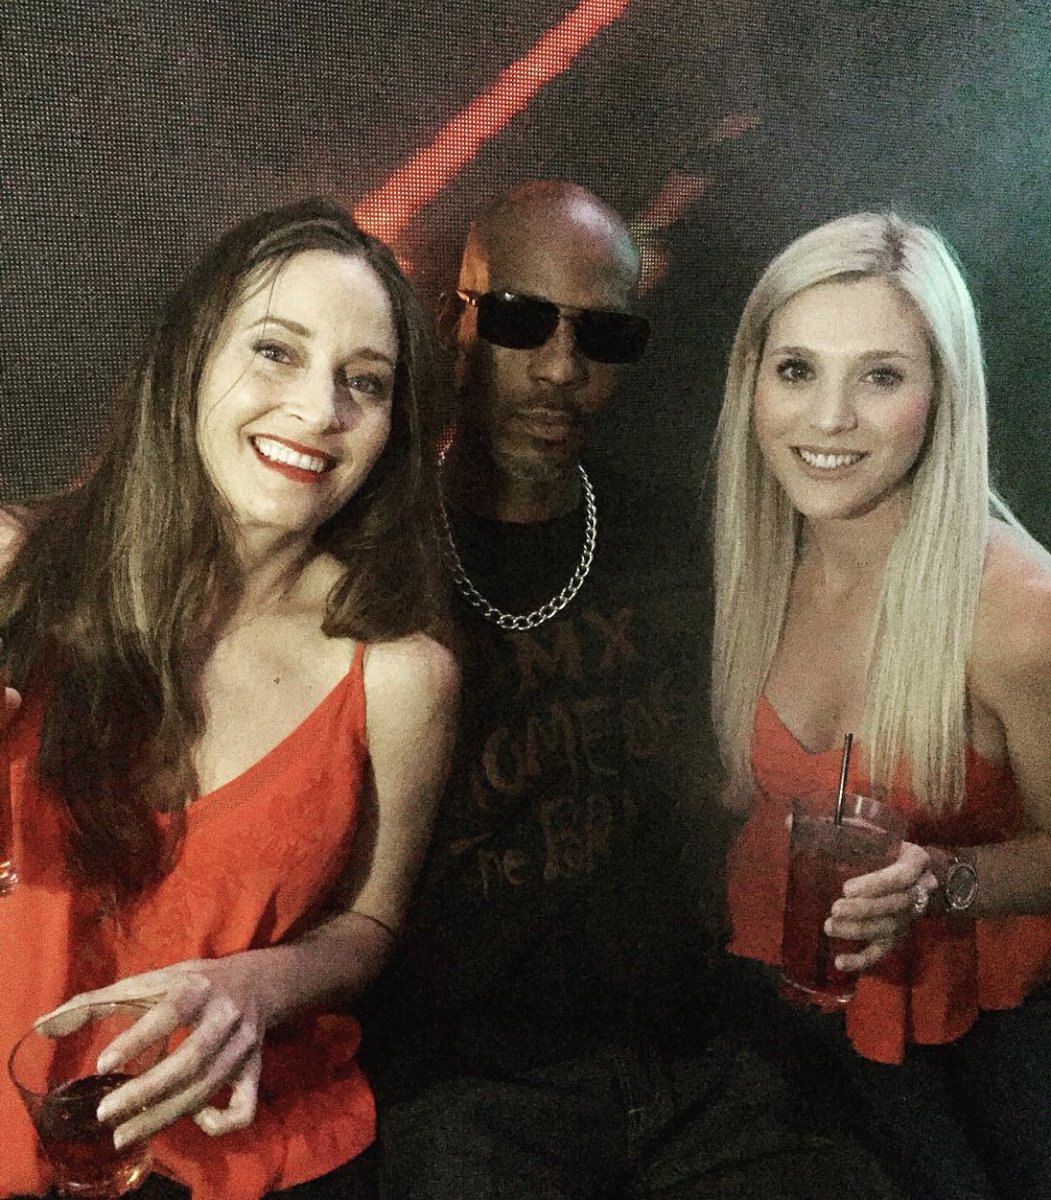 DMX was very gracious.He narrowed his focus preparing to perform. We sat on stage and watched him perform a set. He took a break and sat with us. Mia was all over snapchat documenting her night.